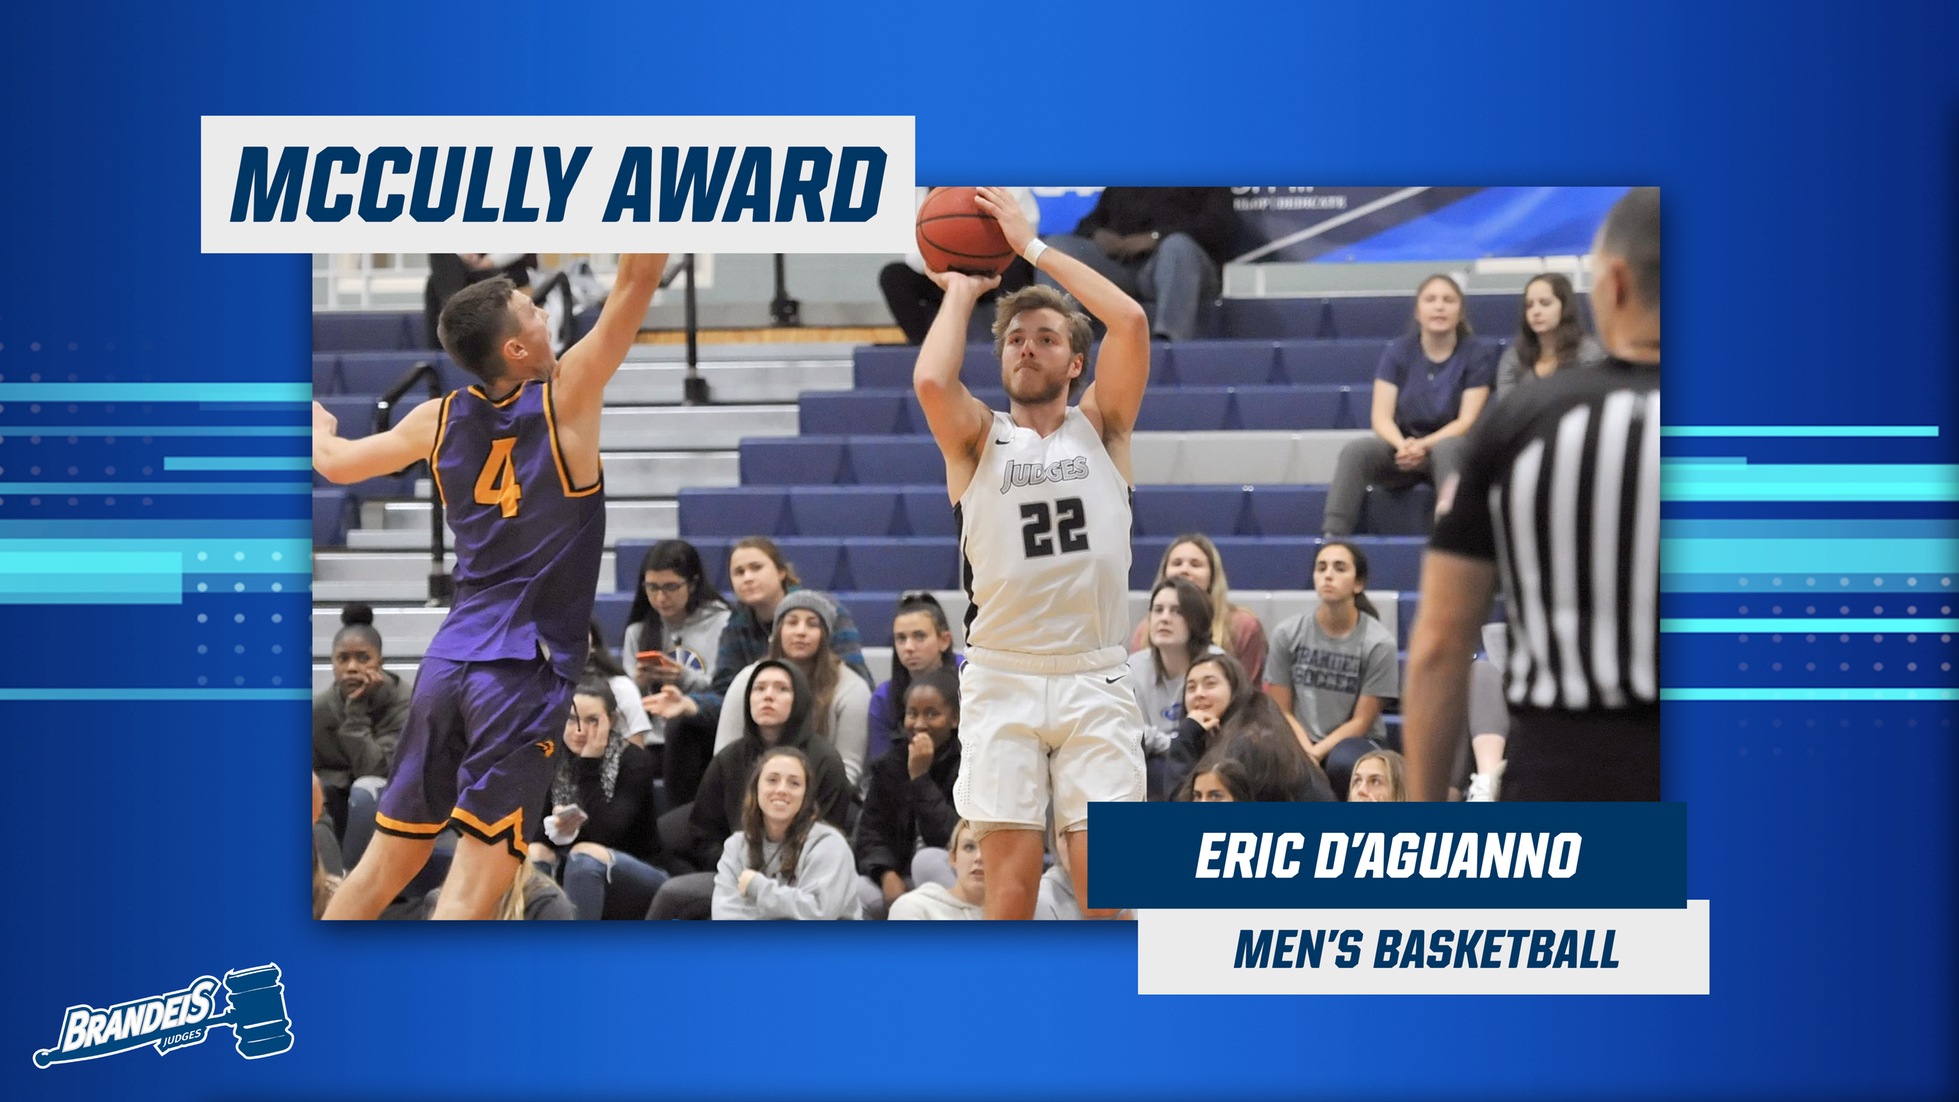 McCully Award winner Eric D'Aguanno hoisting a 3-pointer